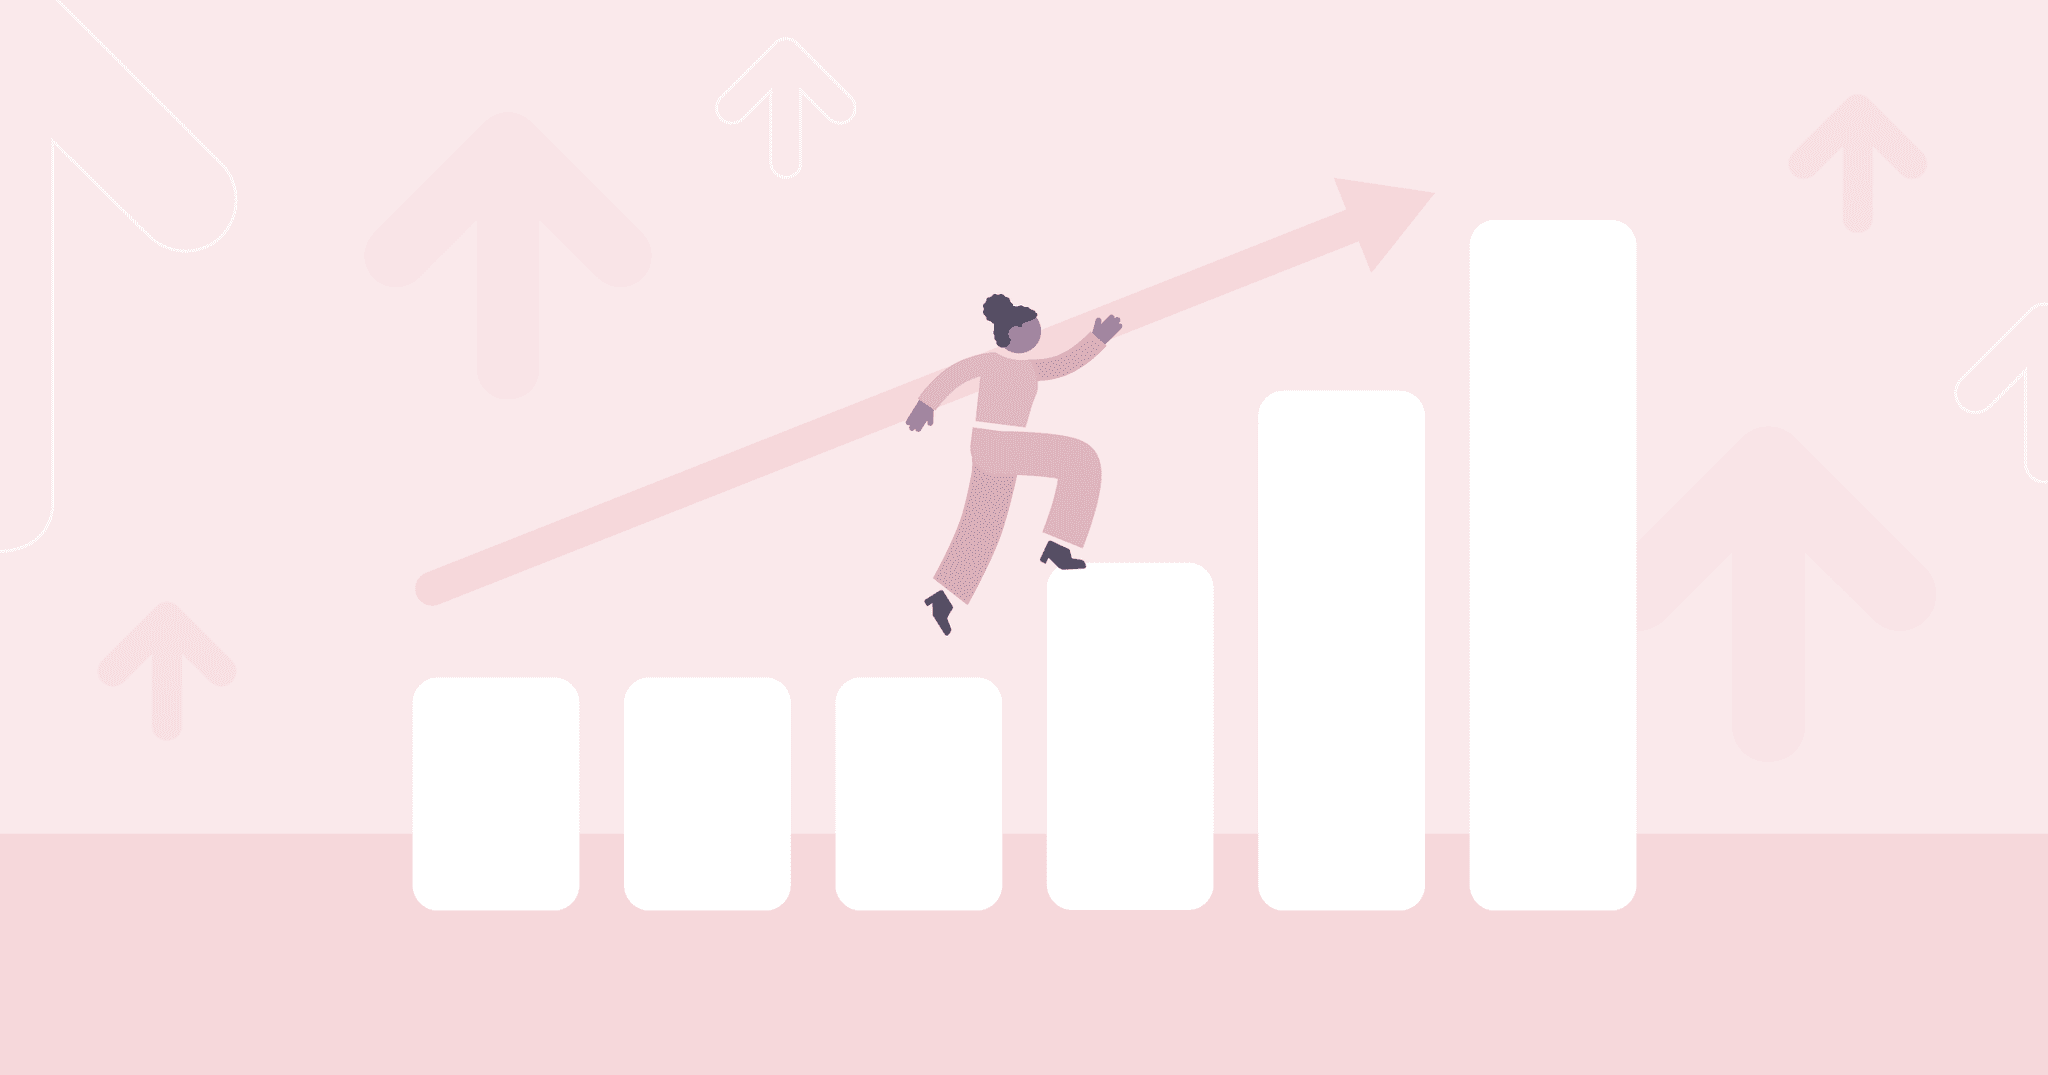 How to Break Through a Growth Plateau at Your Agency